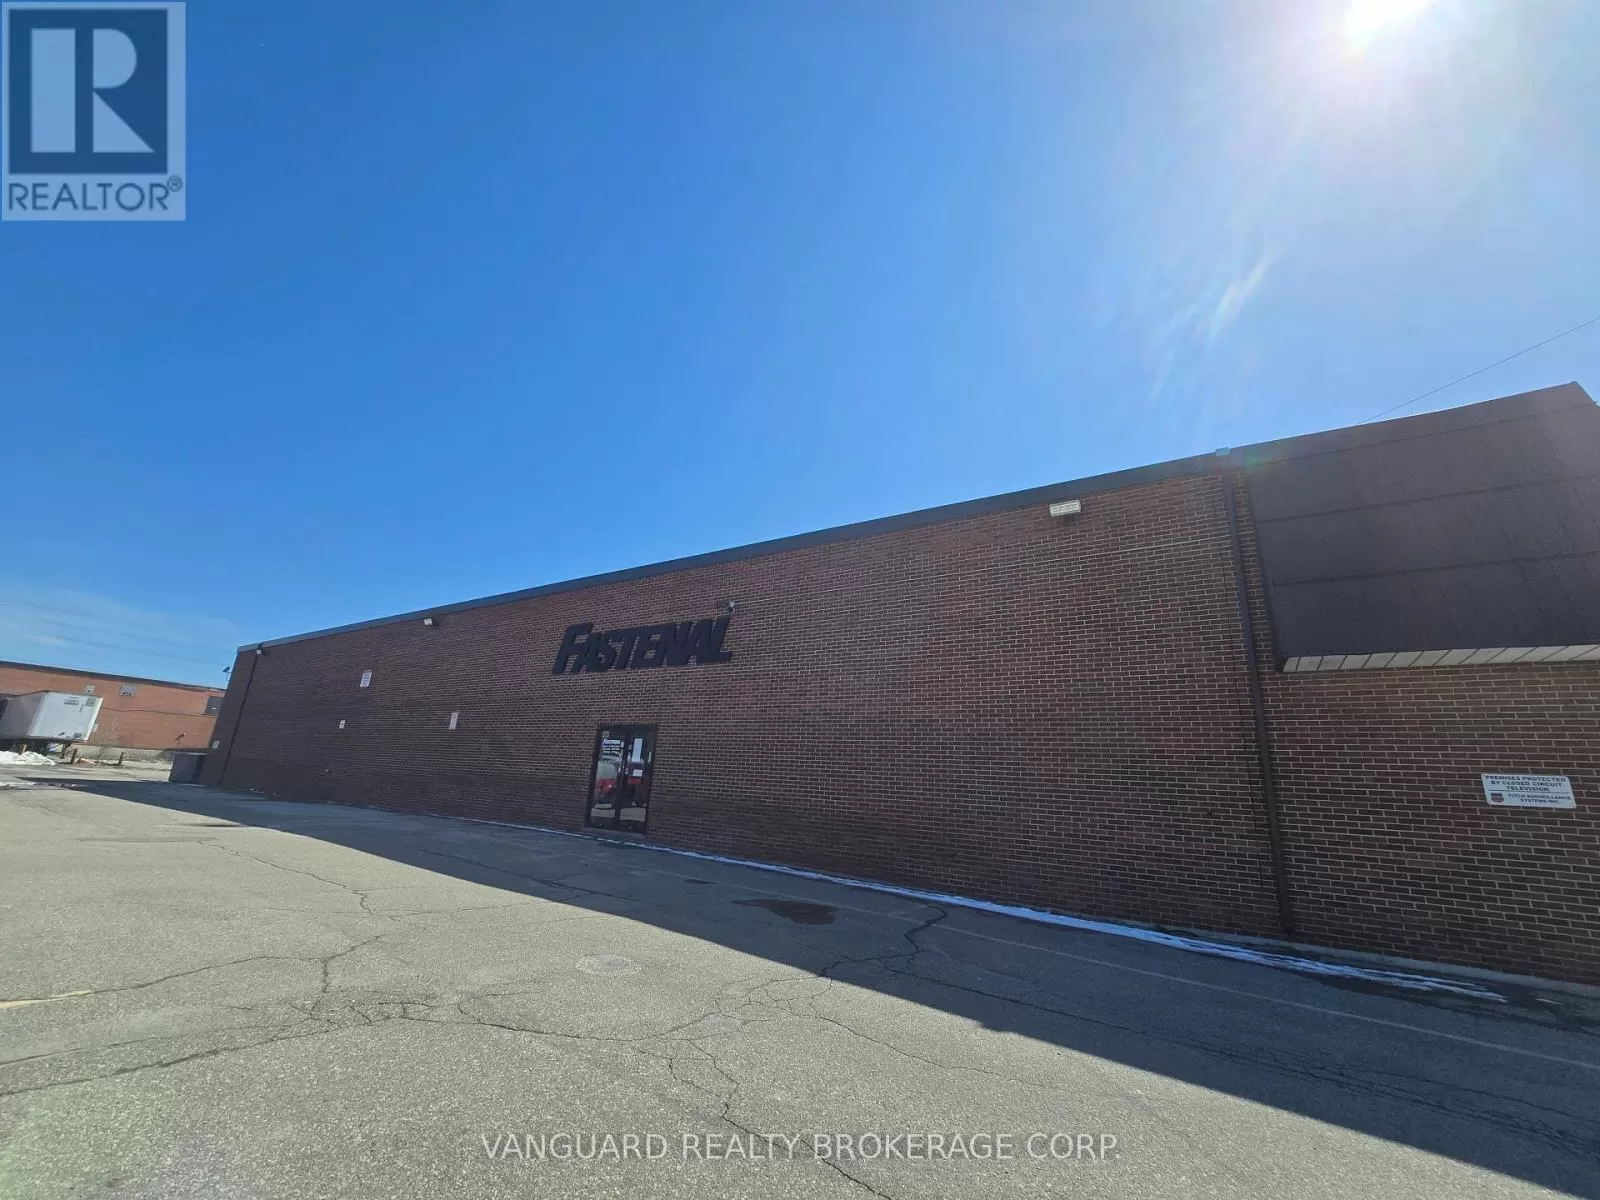 Multi-Tenant Industrial for rent: 1 - 145 City View Drive, Toronto, Ontario M9W 5B1